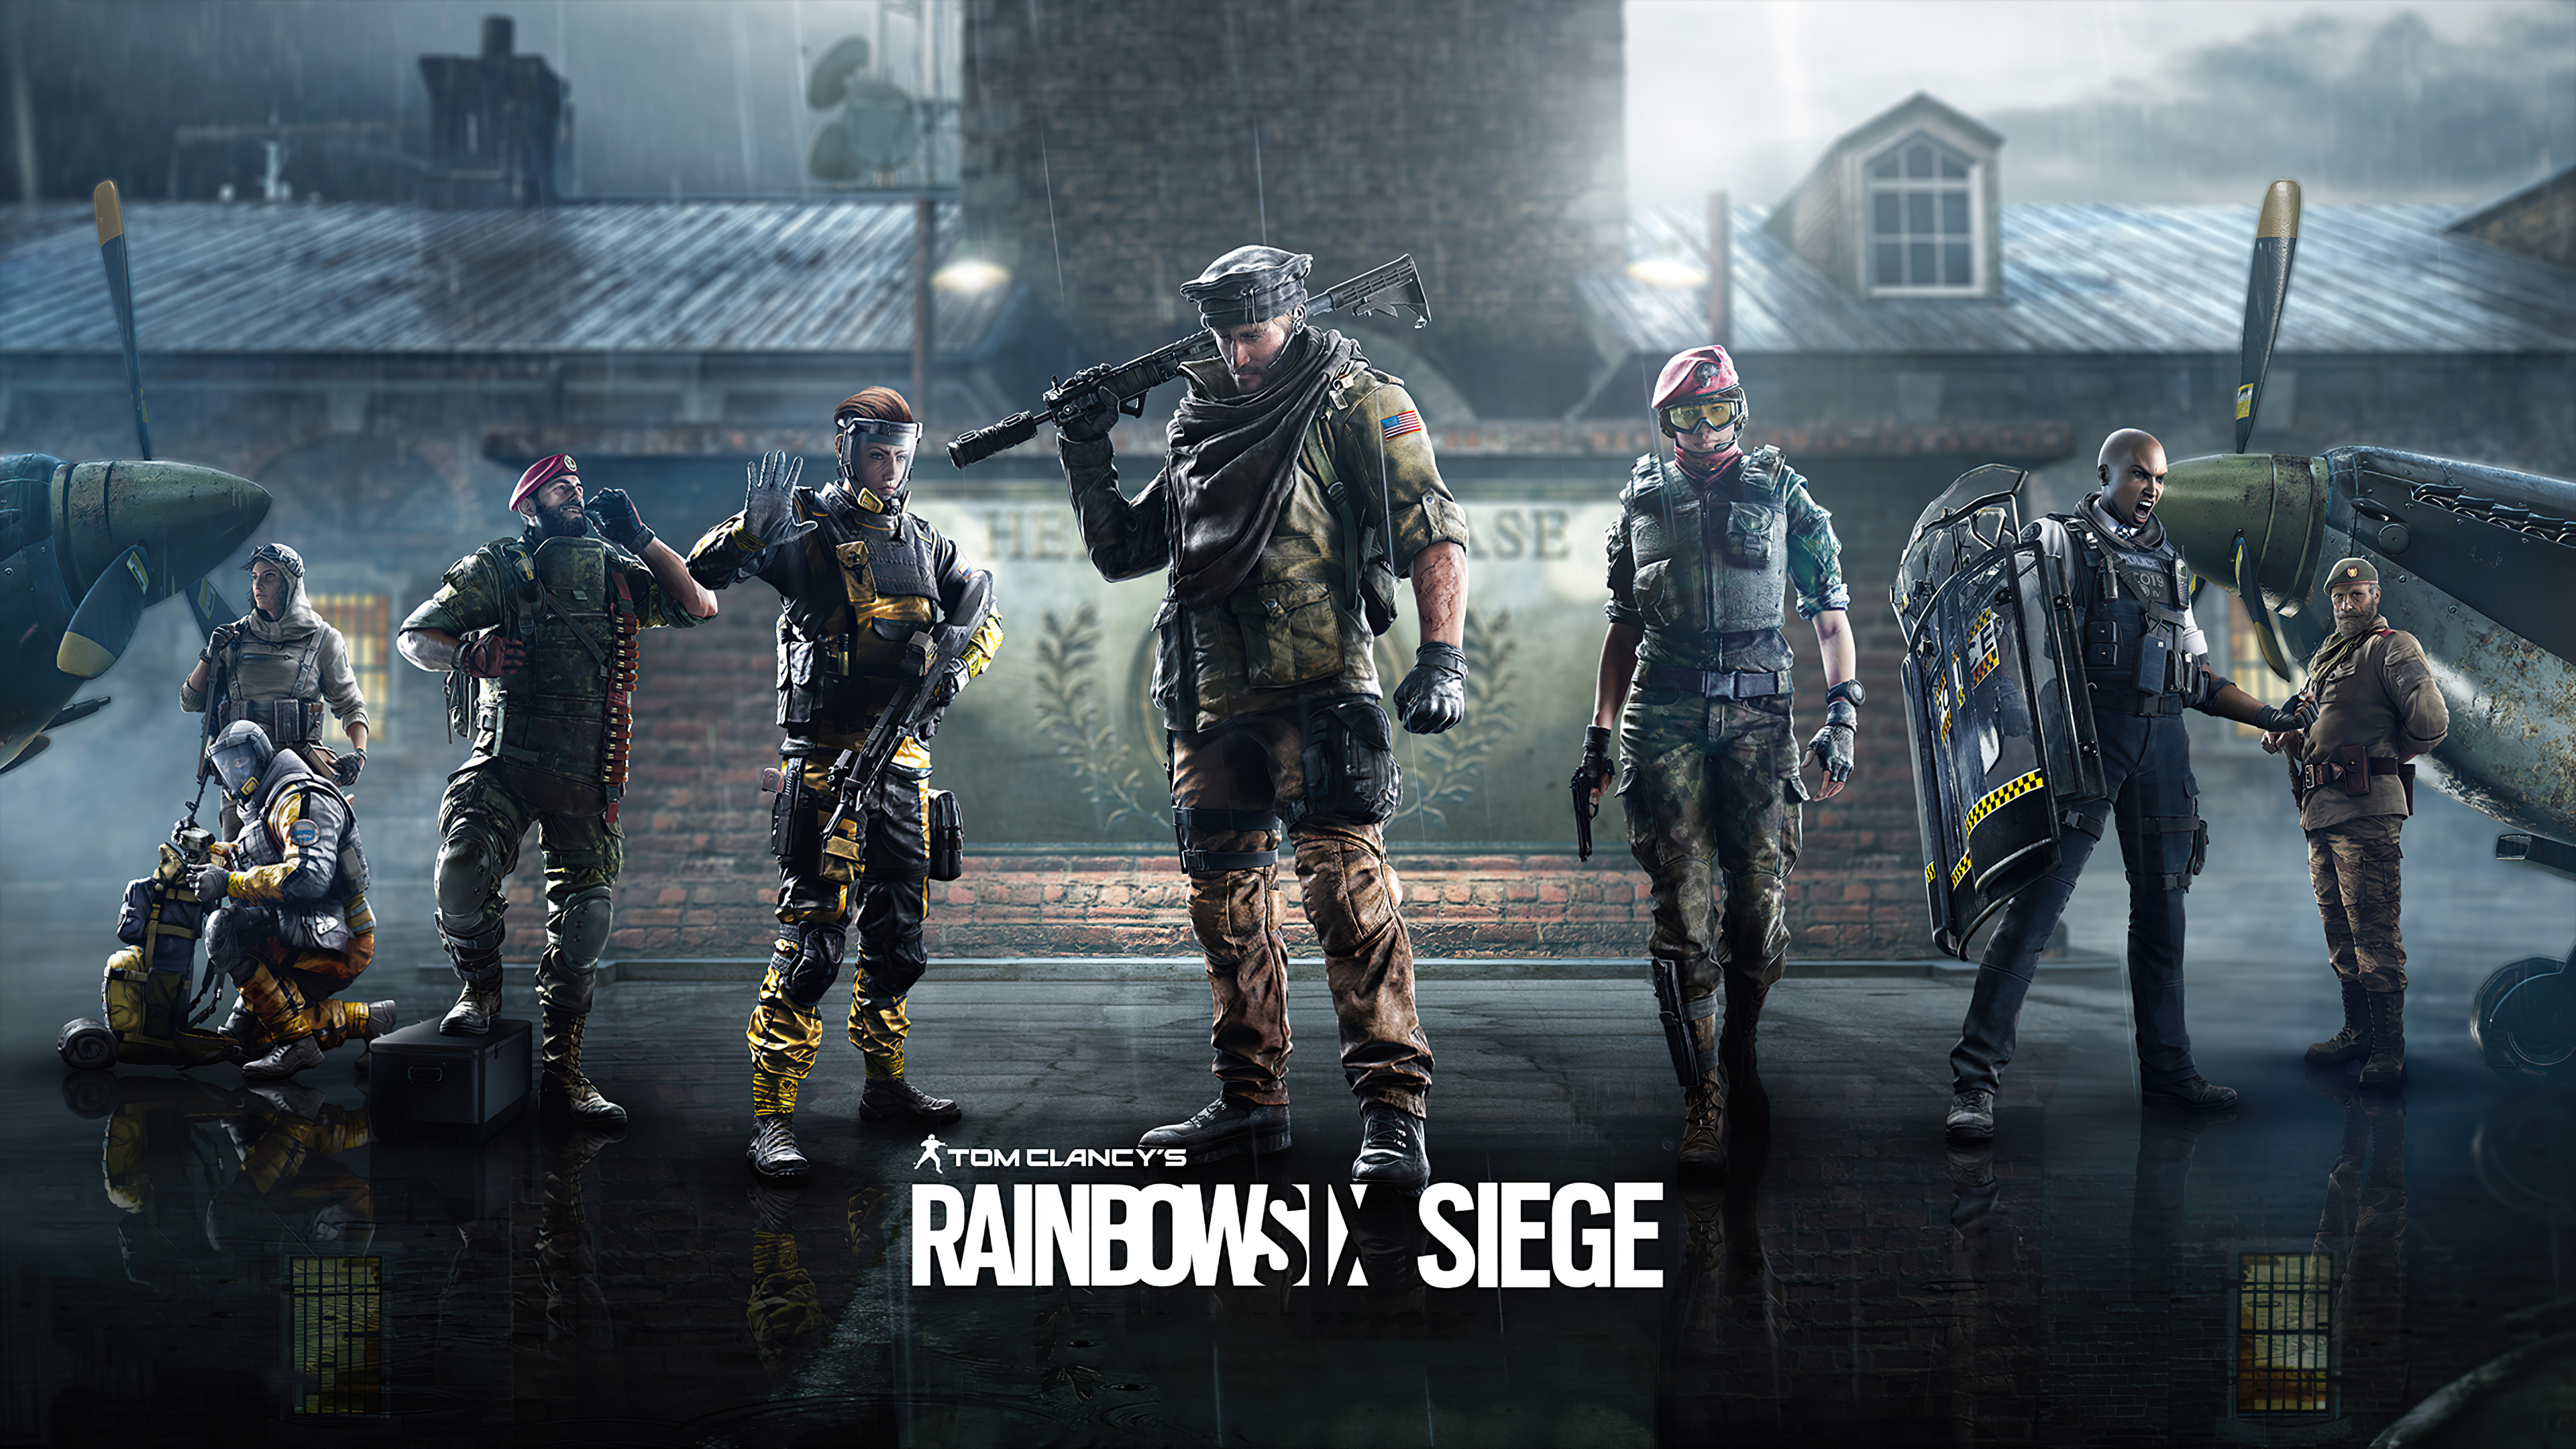 Wallpapers Xbox games Tom Clancys Rainbow Six Siege Ps4 Games on the desktop